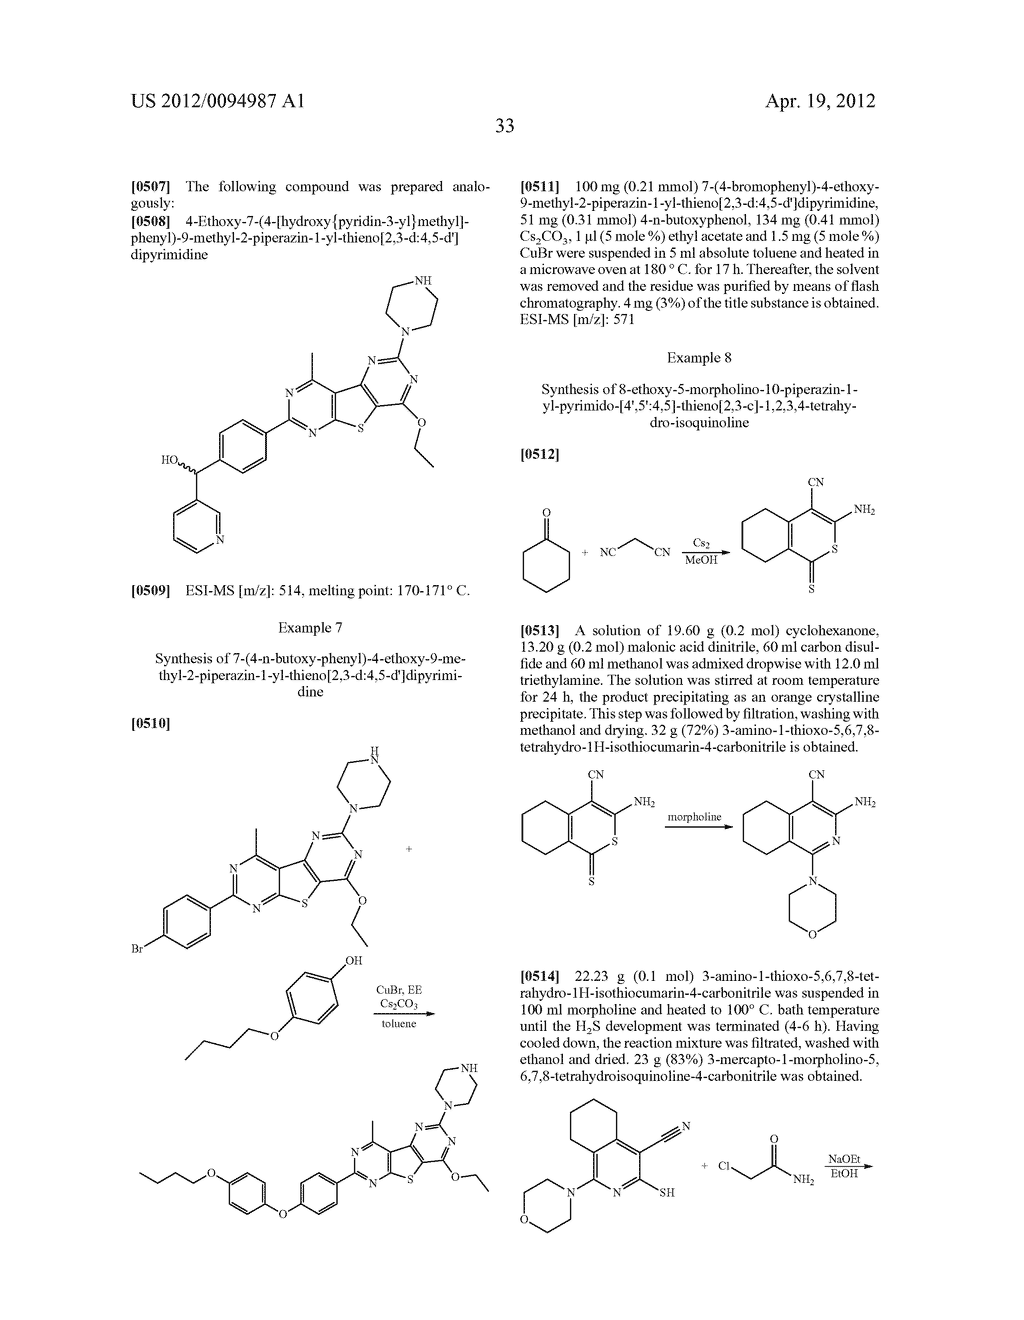 SUBSTITUTED PYRIDO [3', 2': 4, 5] THIENO [3, 2-D] PYRIMIDINES AND PYRIDO     [3', 2': 4, 5] FURO [3, 2-D] PYRIMIDINES USED AS INHIBITORS OF THE PDE-4     AND/OR THE RELEASE OF TNF-alpha - diagram, schematic, and image 35